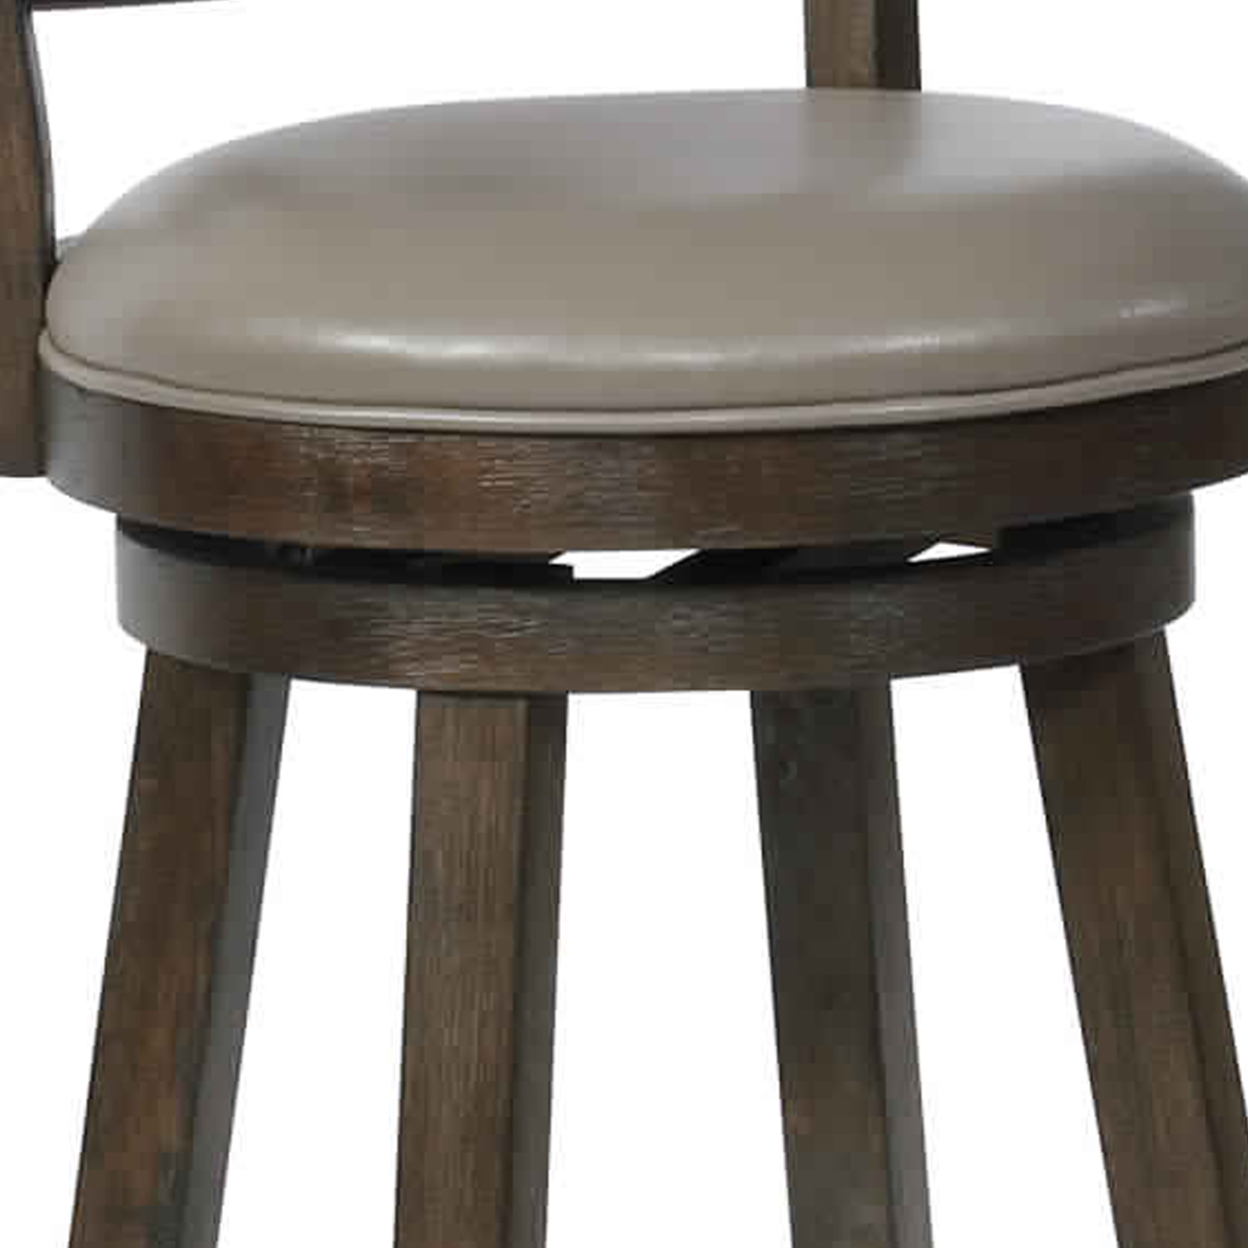 Curved Back Swivel Pub Stool With Leatherette Seat,Set Of 2, Gray And Brown- Saltoro Sherpi